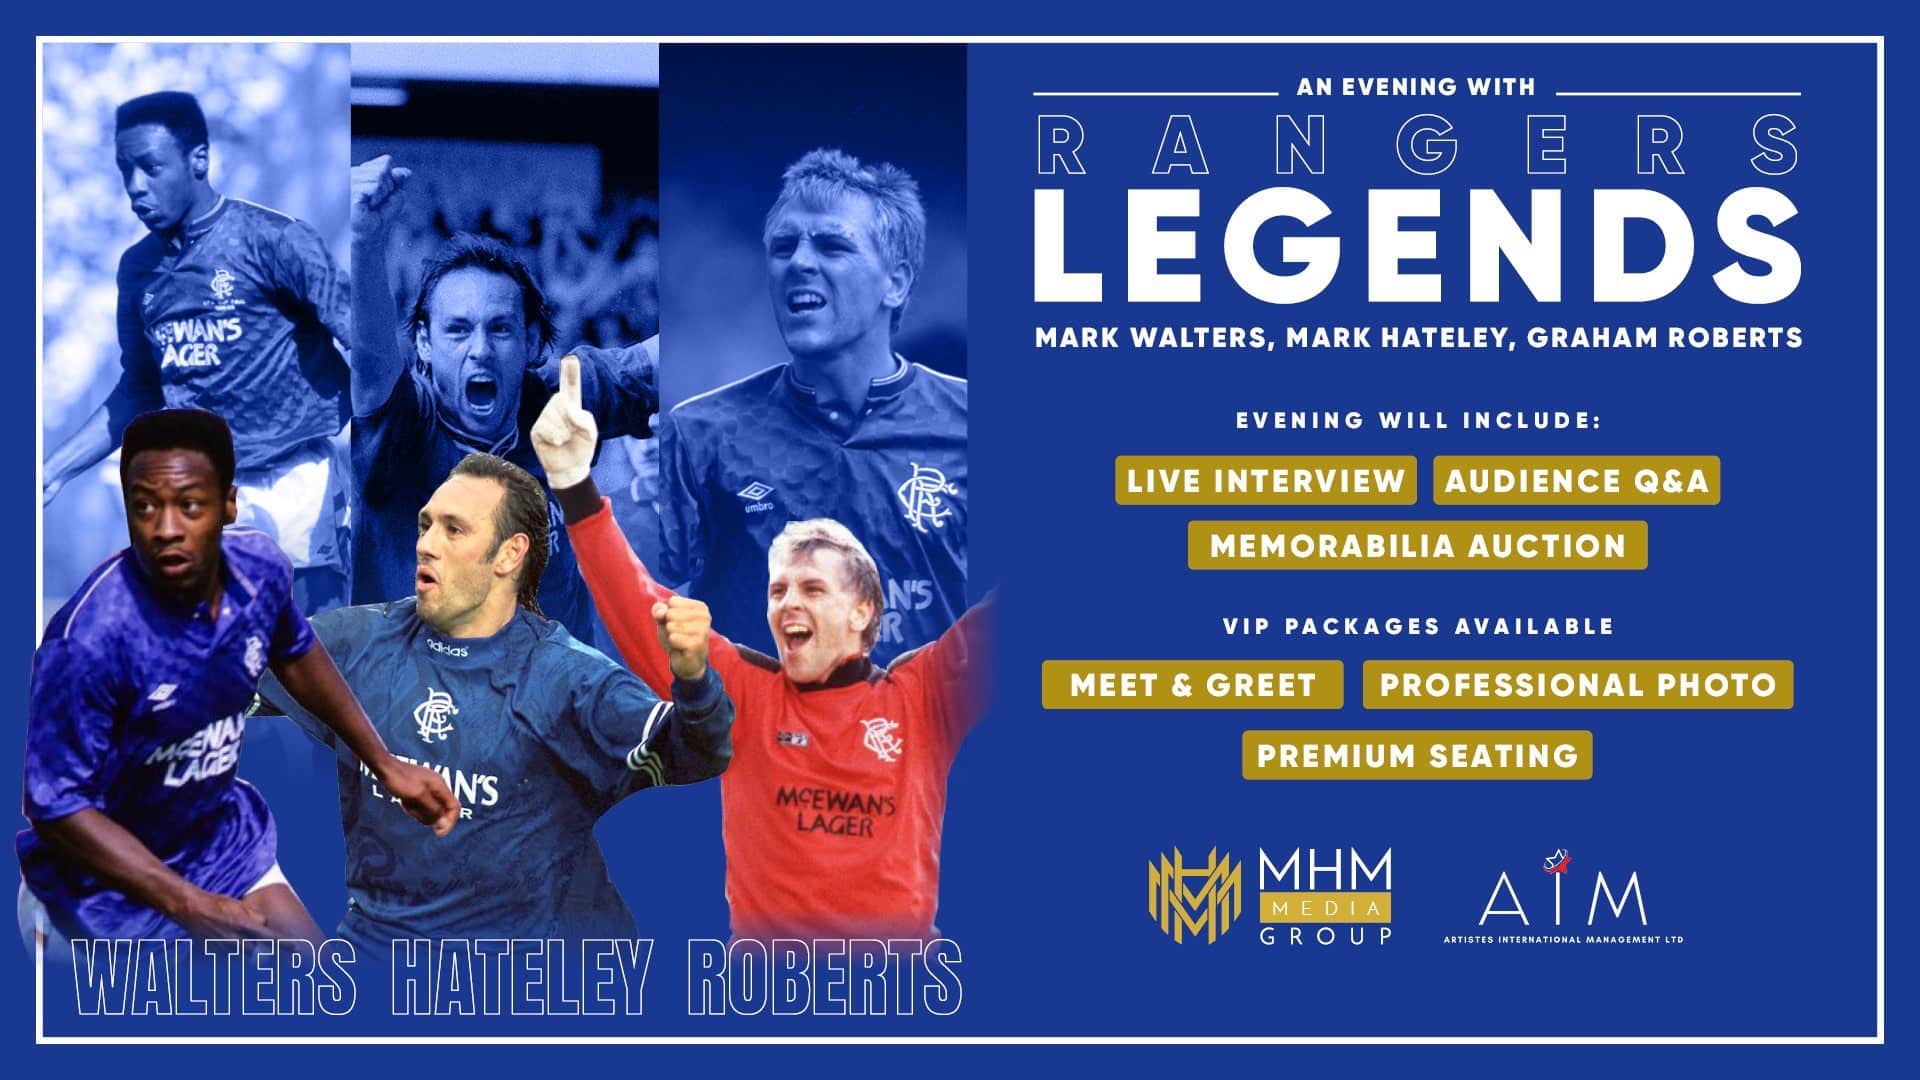 An Evening with Rangers Legends: Mark Walters, Mark Hateley, Graham Roberts